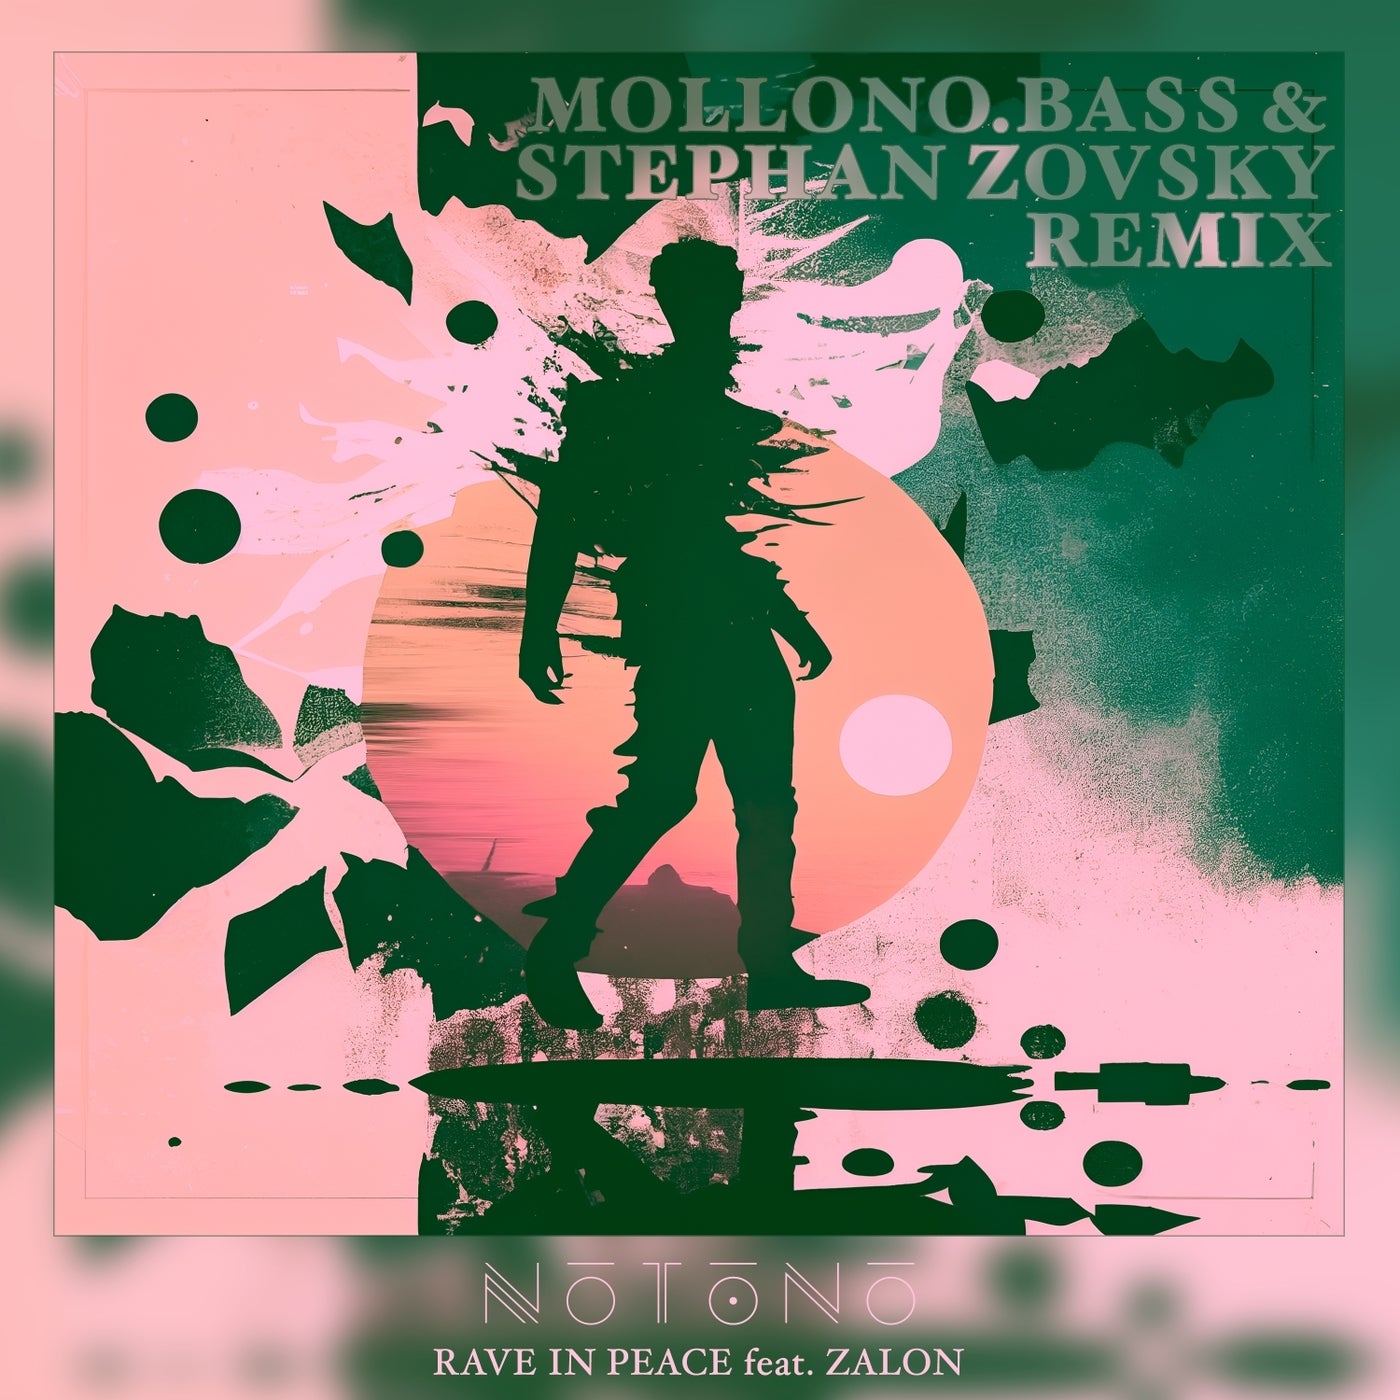 Rave in Peace (Mollono.bass & Stephan Zovsky Remix)